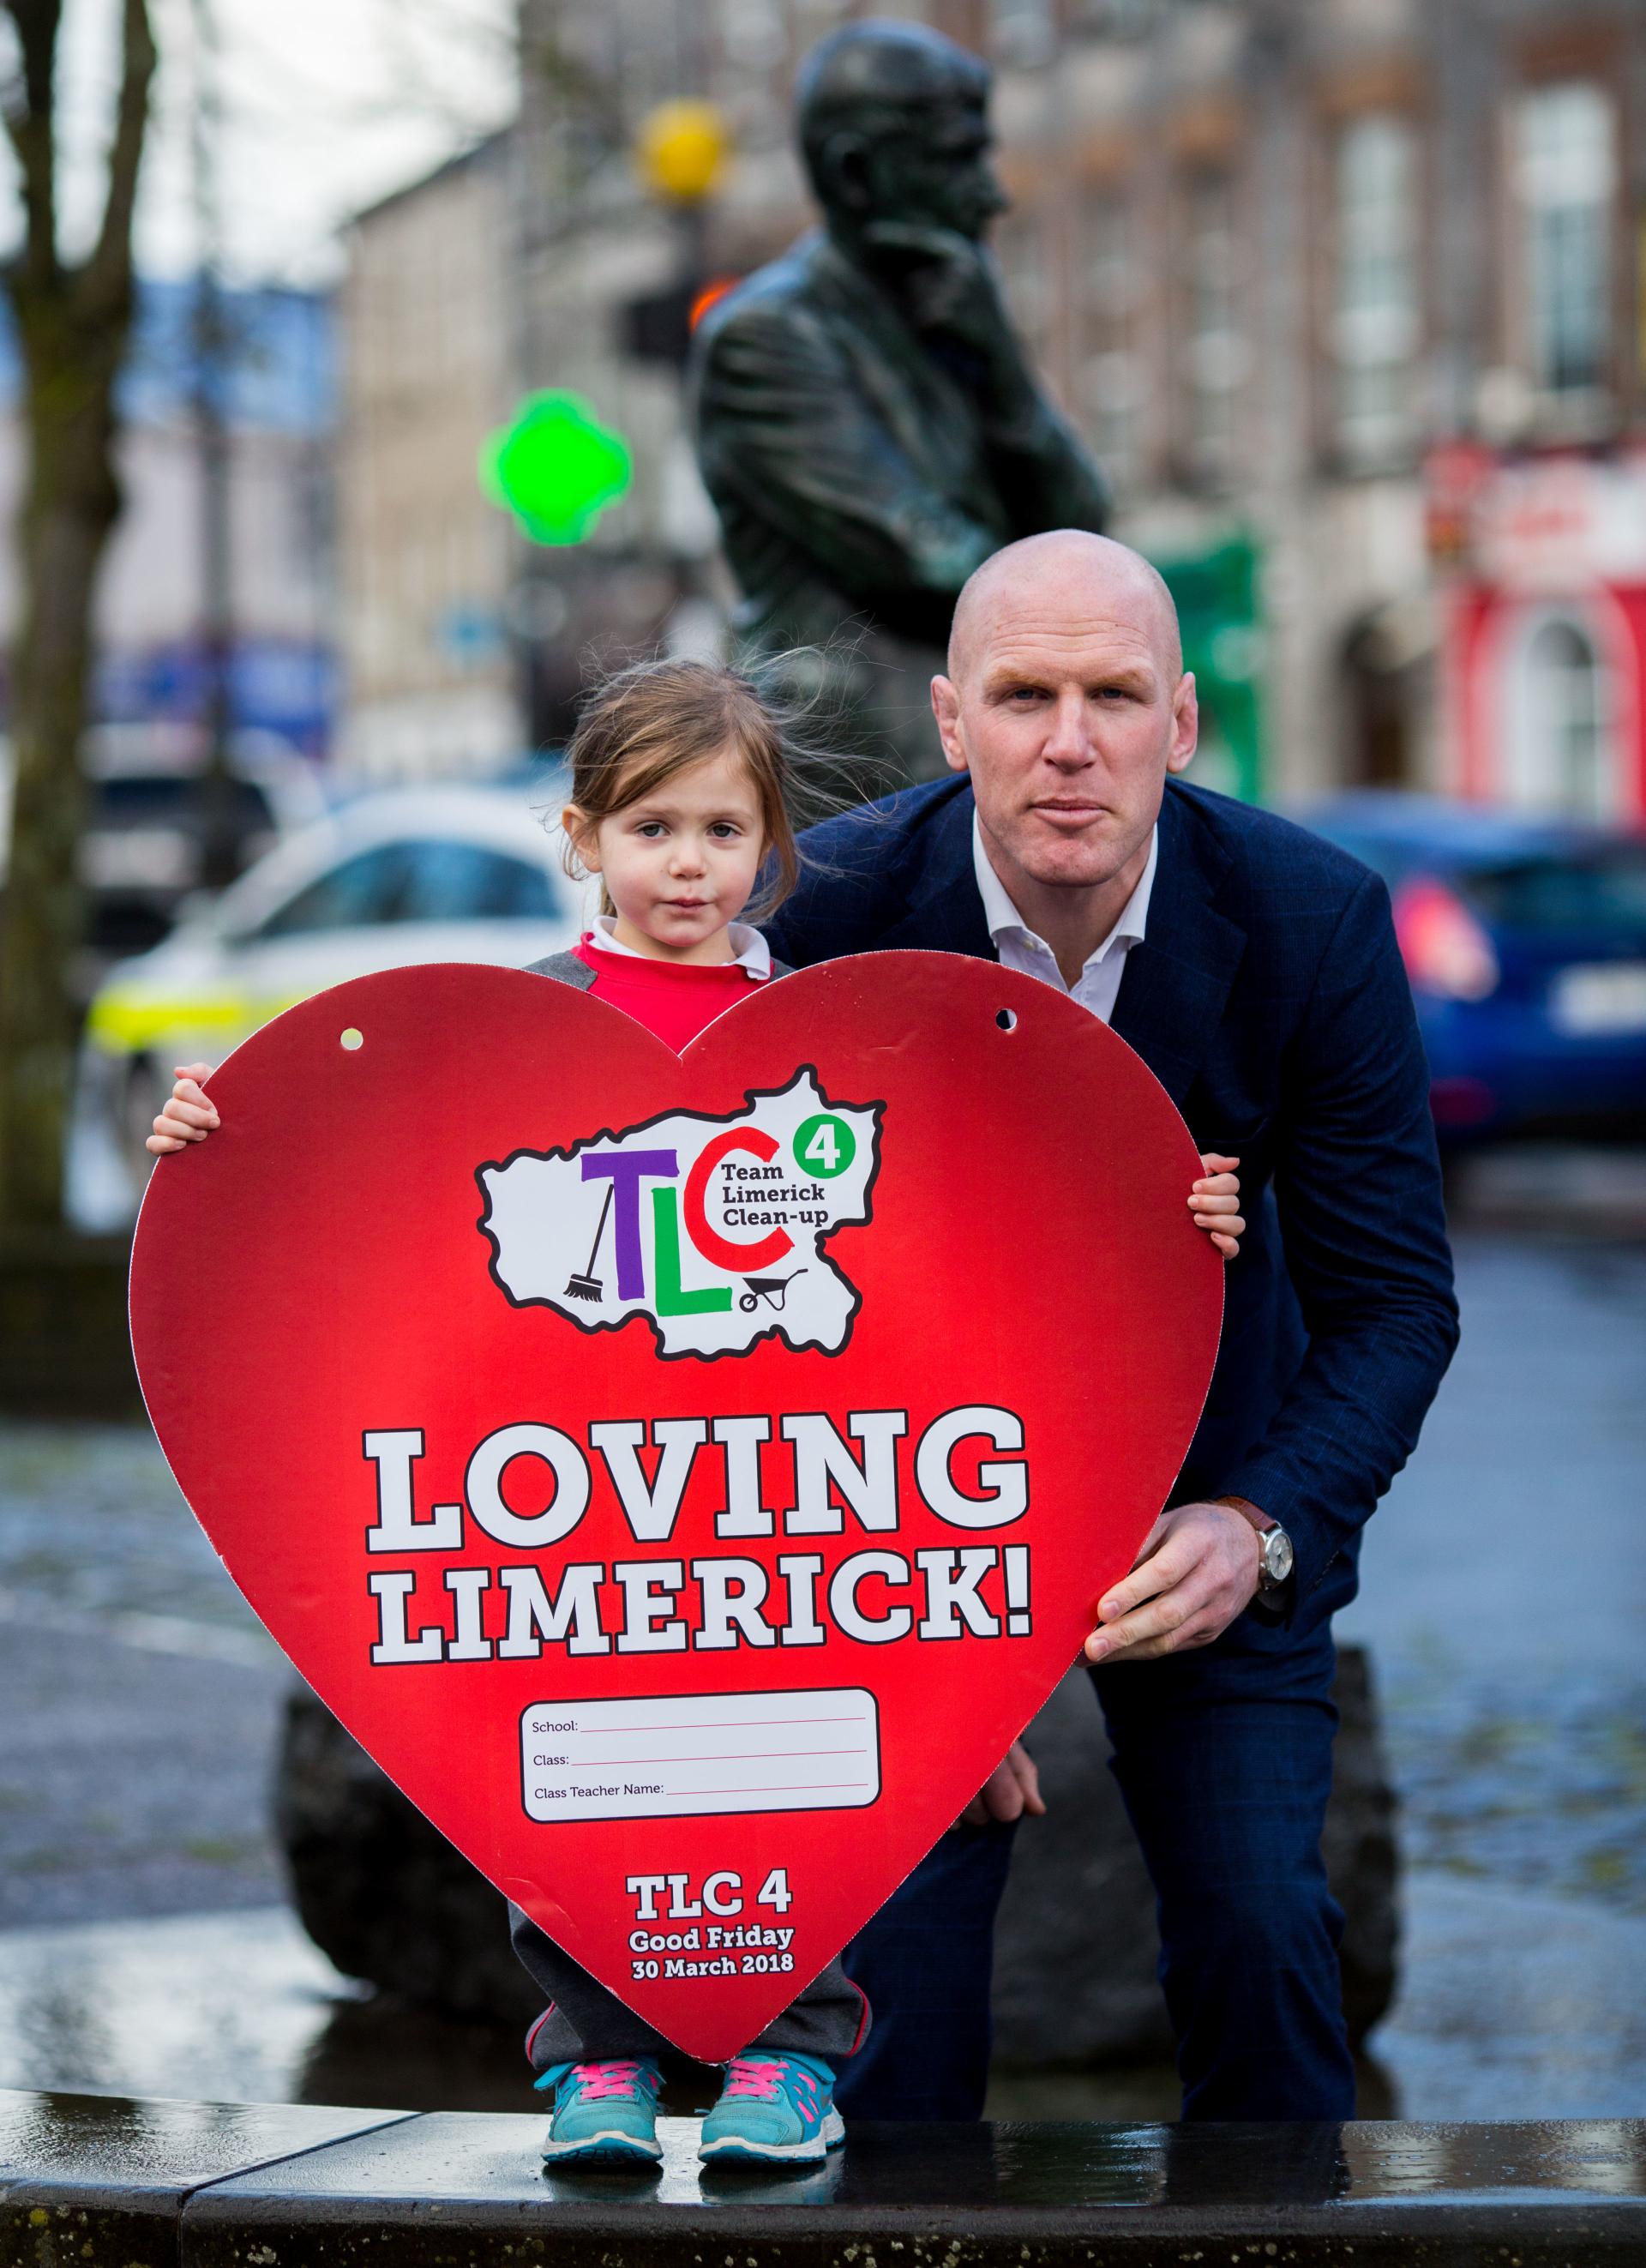 Paul O'Connell and a young girl launch TLC4